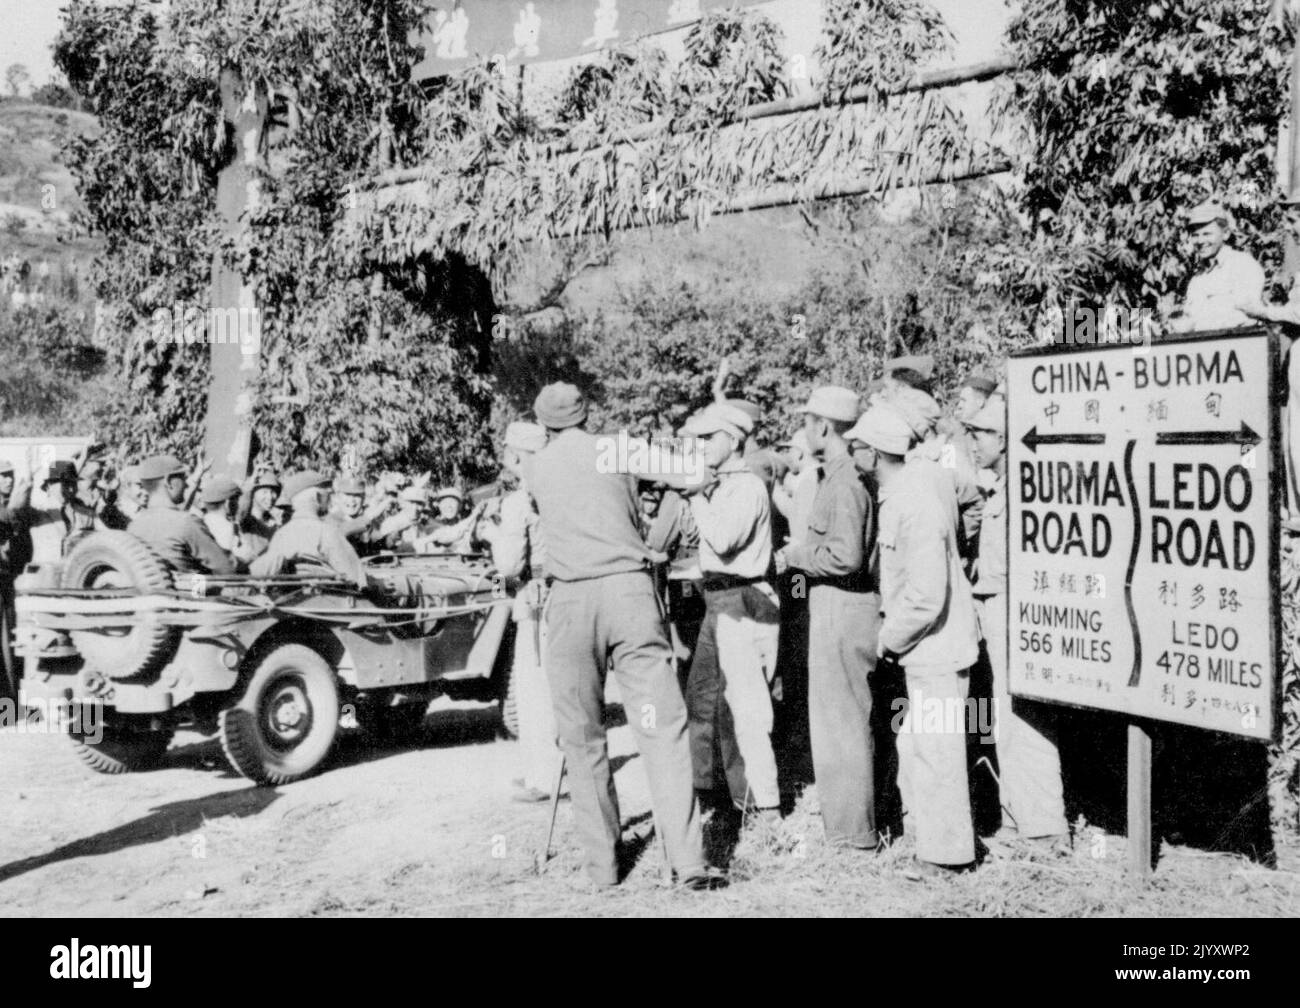 Burma And Ledo Roads Joined -- Brig. Gen. Lewis B. Pick, Commander and Chief Engineer of the Ledo Road construction project rides in his jeep through archway marking the junction of the Burma and Ledo Roads. American and Chinese troops stand on the roadside, cheering the occasion. The Ledo road has bee given the unofficial title of 'Pick's Pike' in honor of Gen. Pick. February 17, 1945. (Photo by Associated Press Photo). Stock Photo